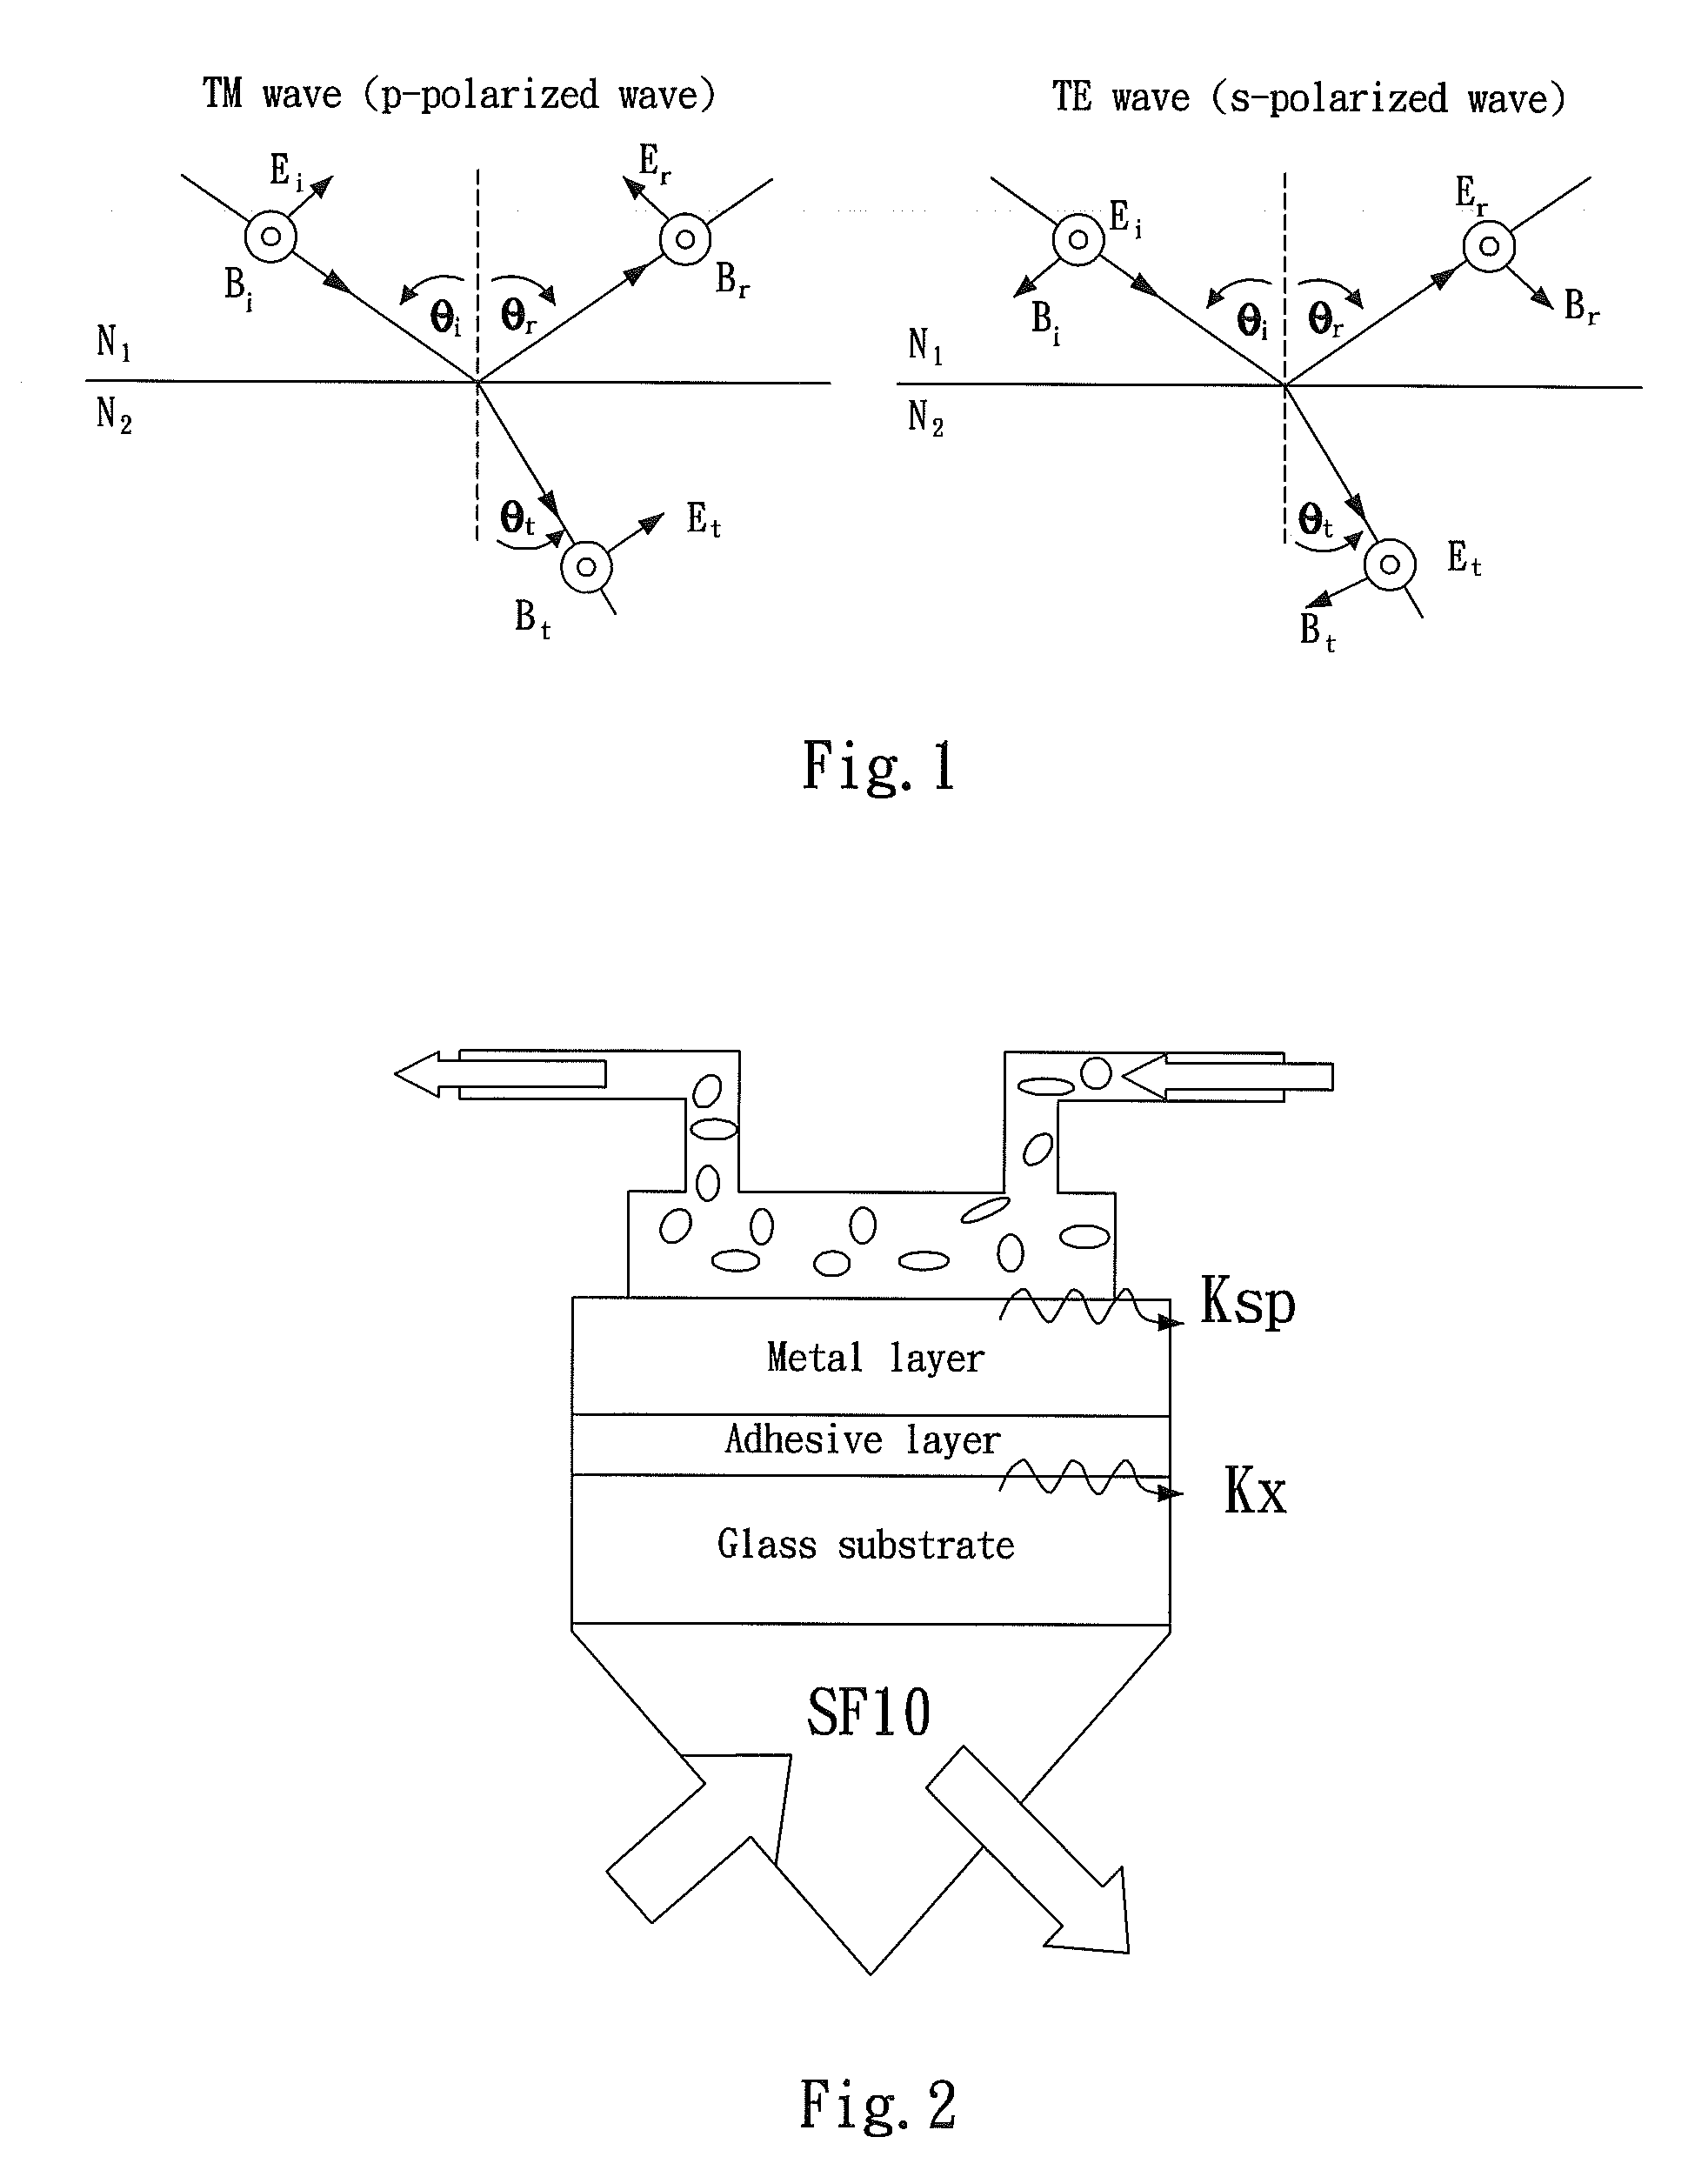 Method for improving surface plasmon resonance by using conducting metal oxide as adhesive layer